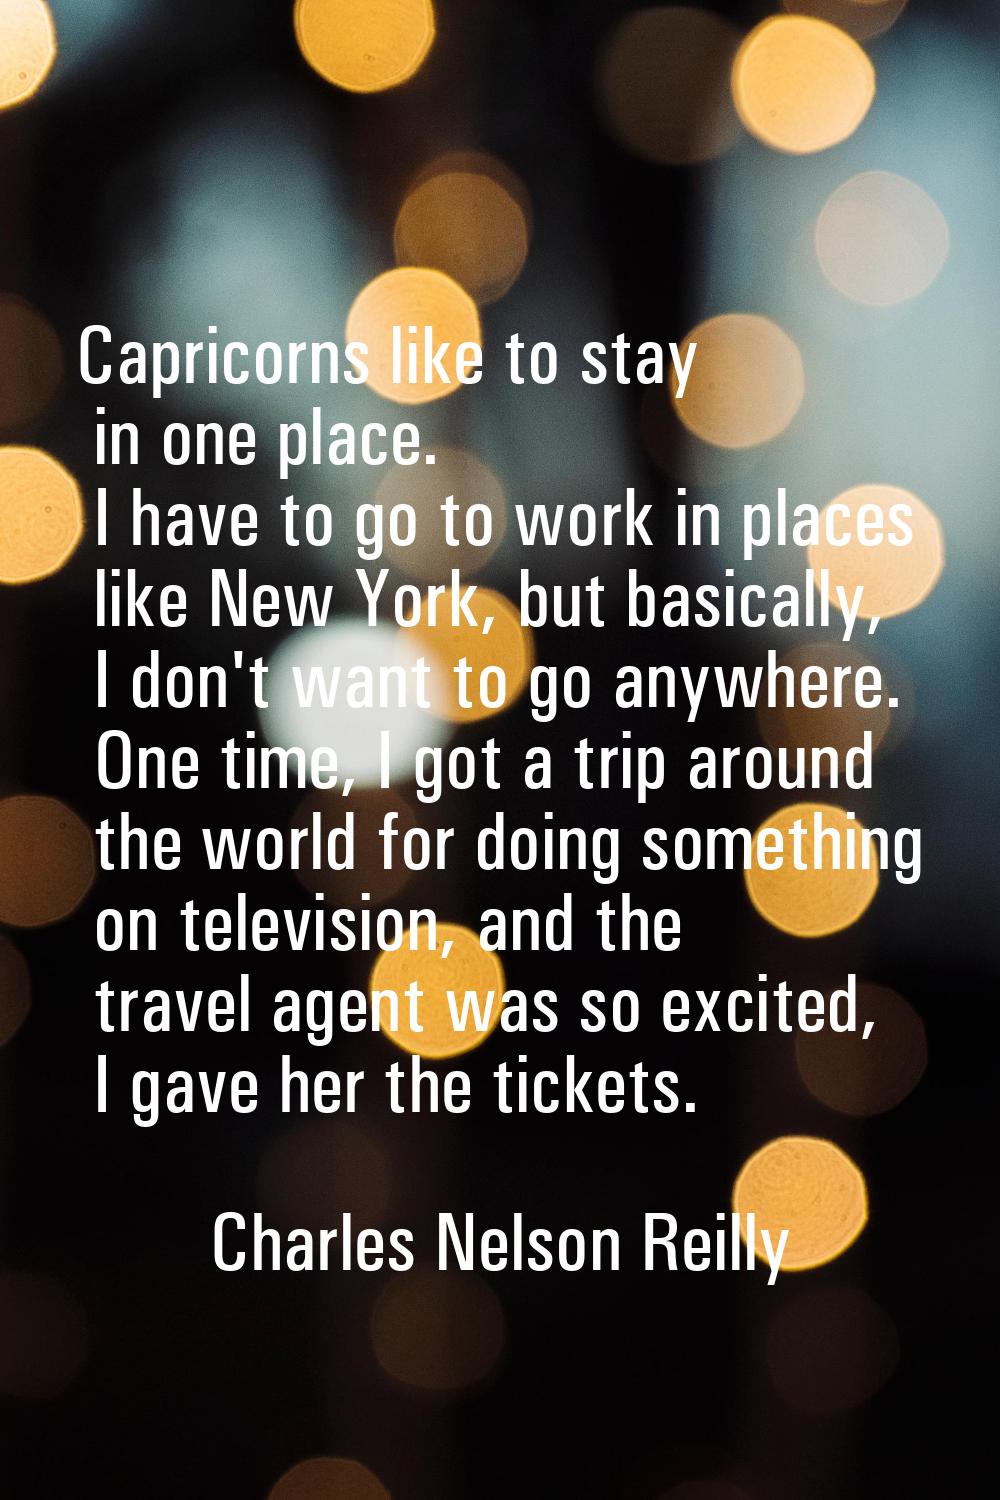 Capricorns like to stay in one place. I have to go to work in places like New York, but basically, 